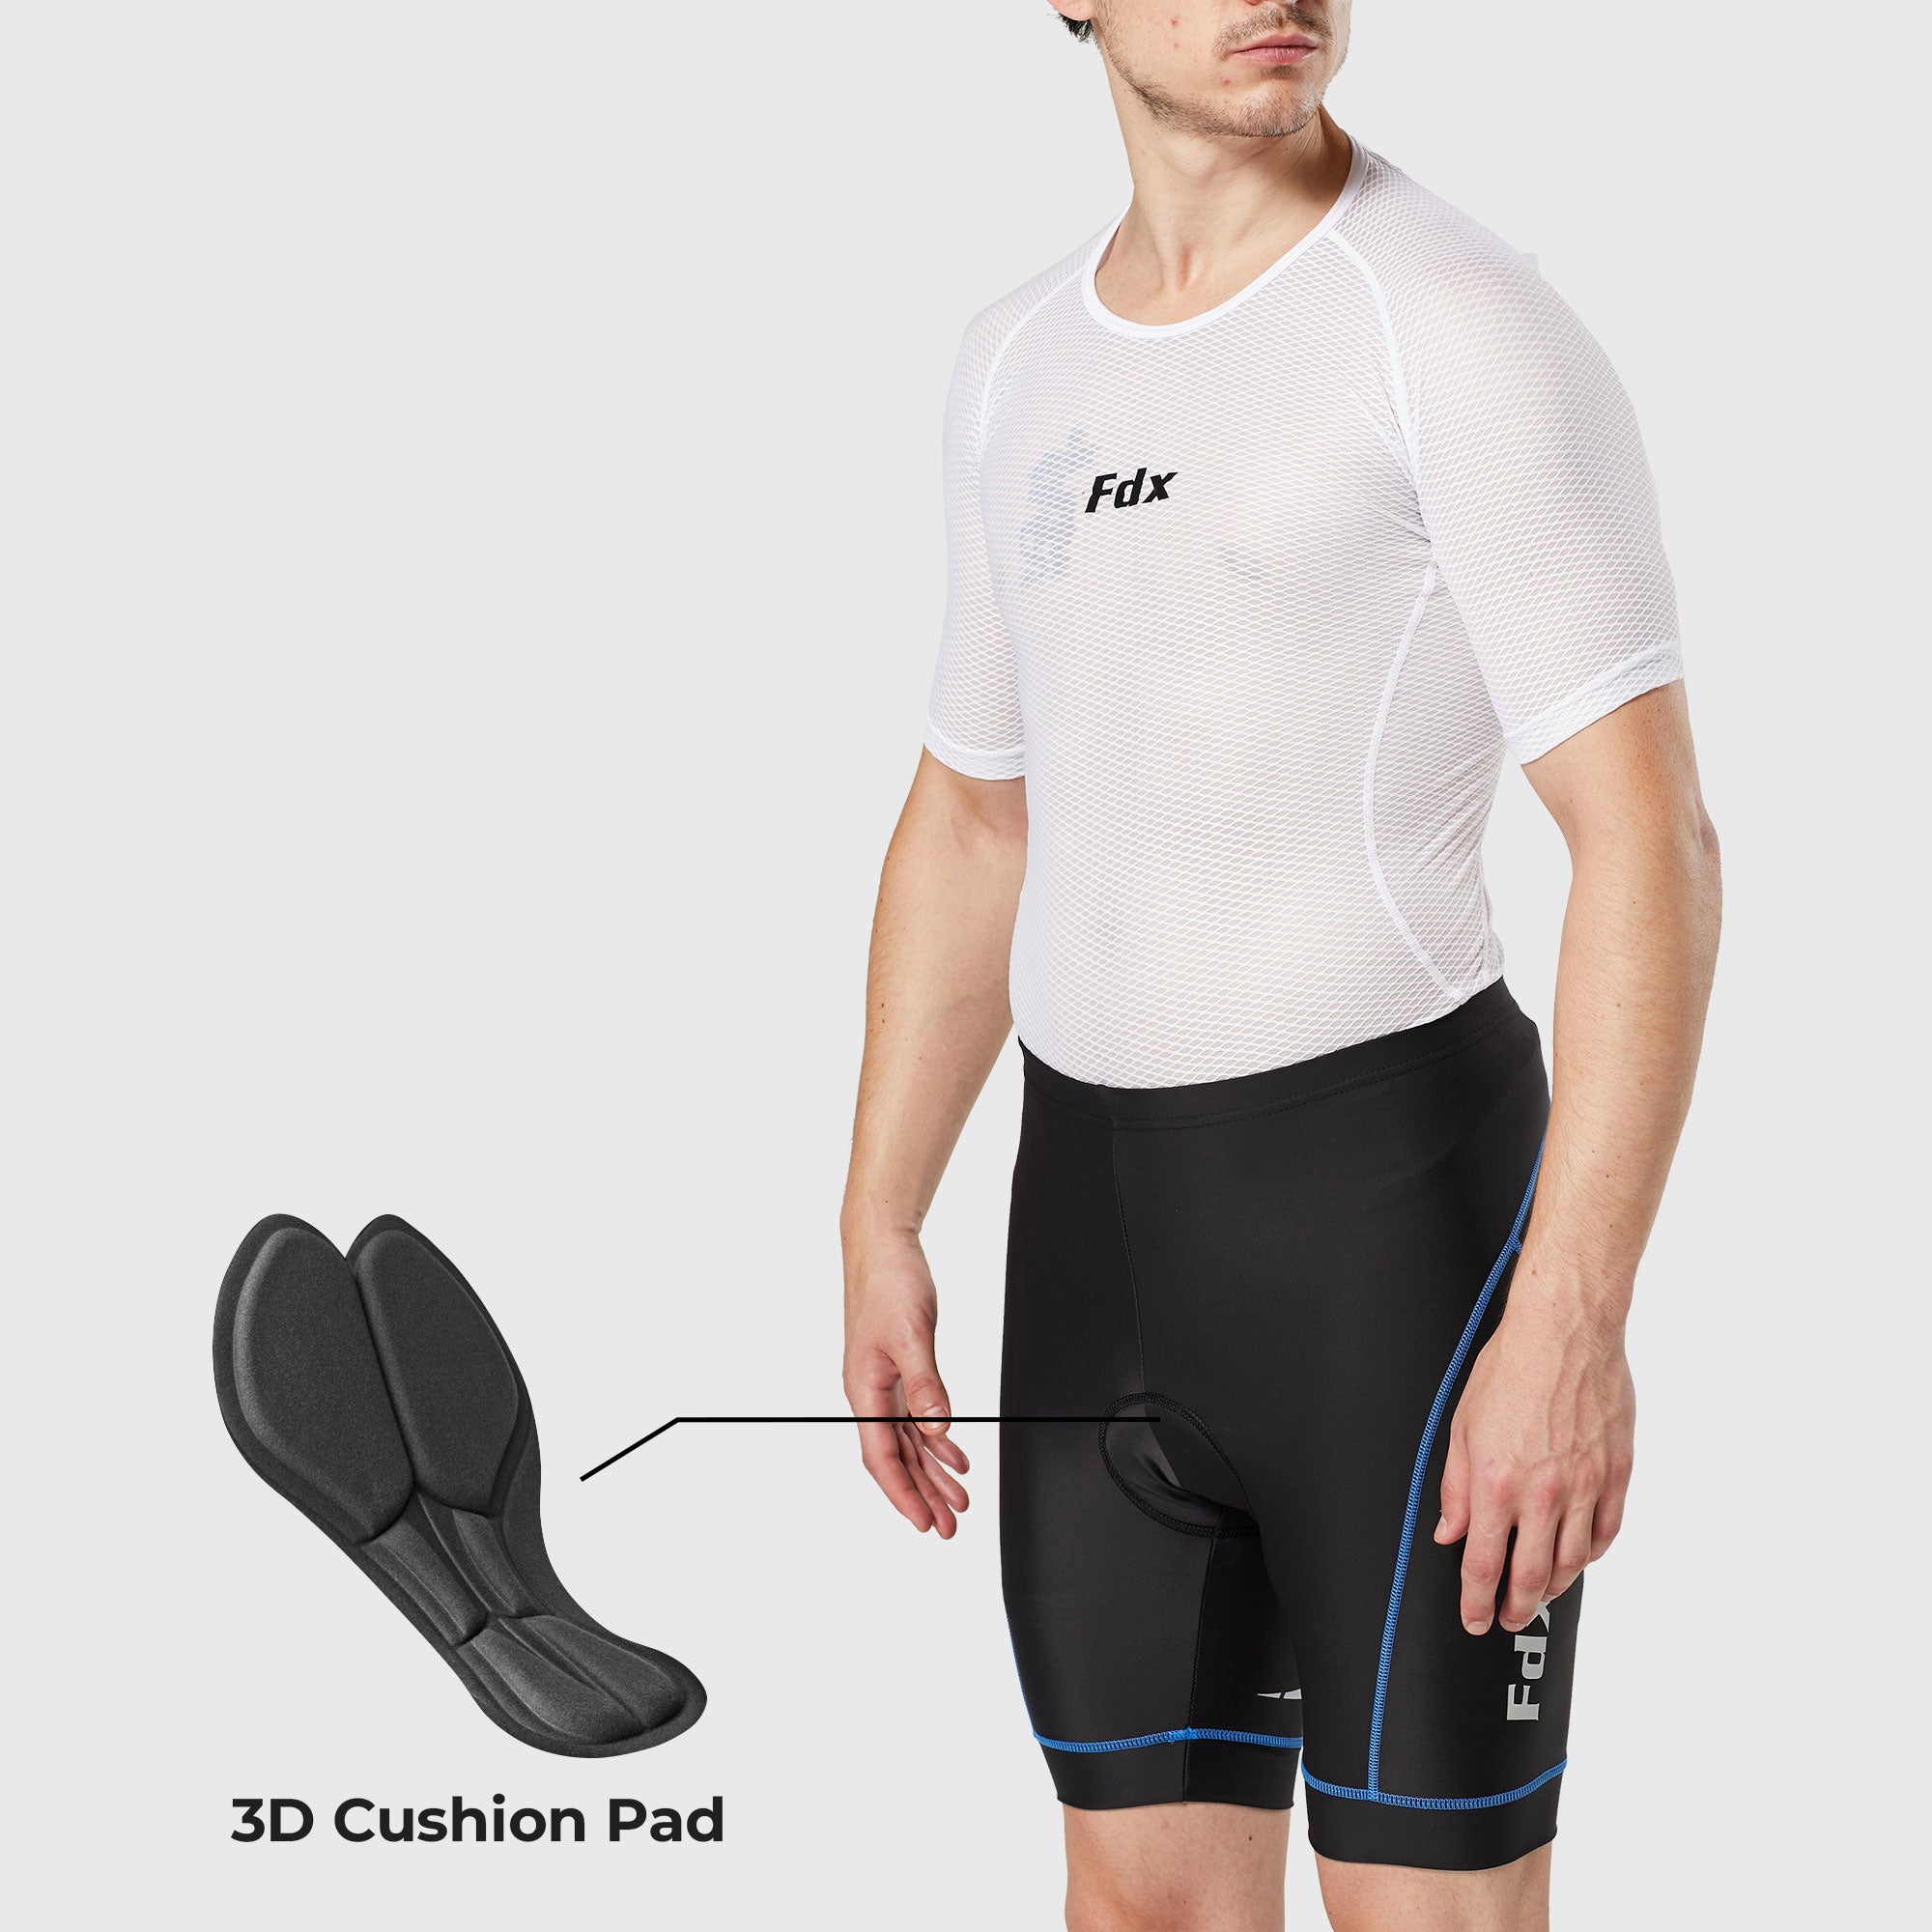 Fdx Mens Black & Blue Gel Padded Cycling Shorts for Summer Best Outdoor Knickers Road Bike Short Length Pants - Ridest